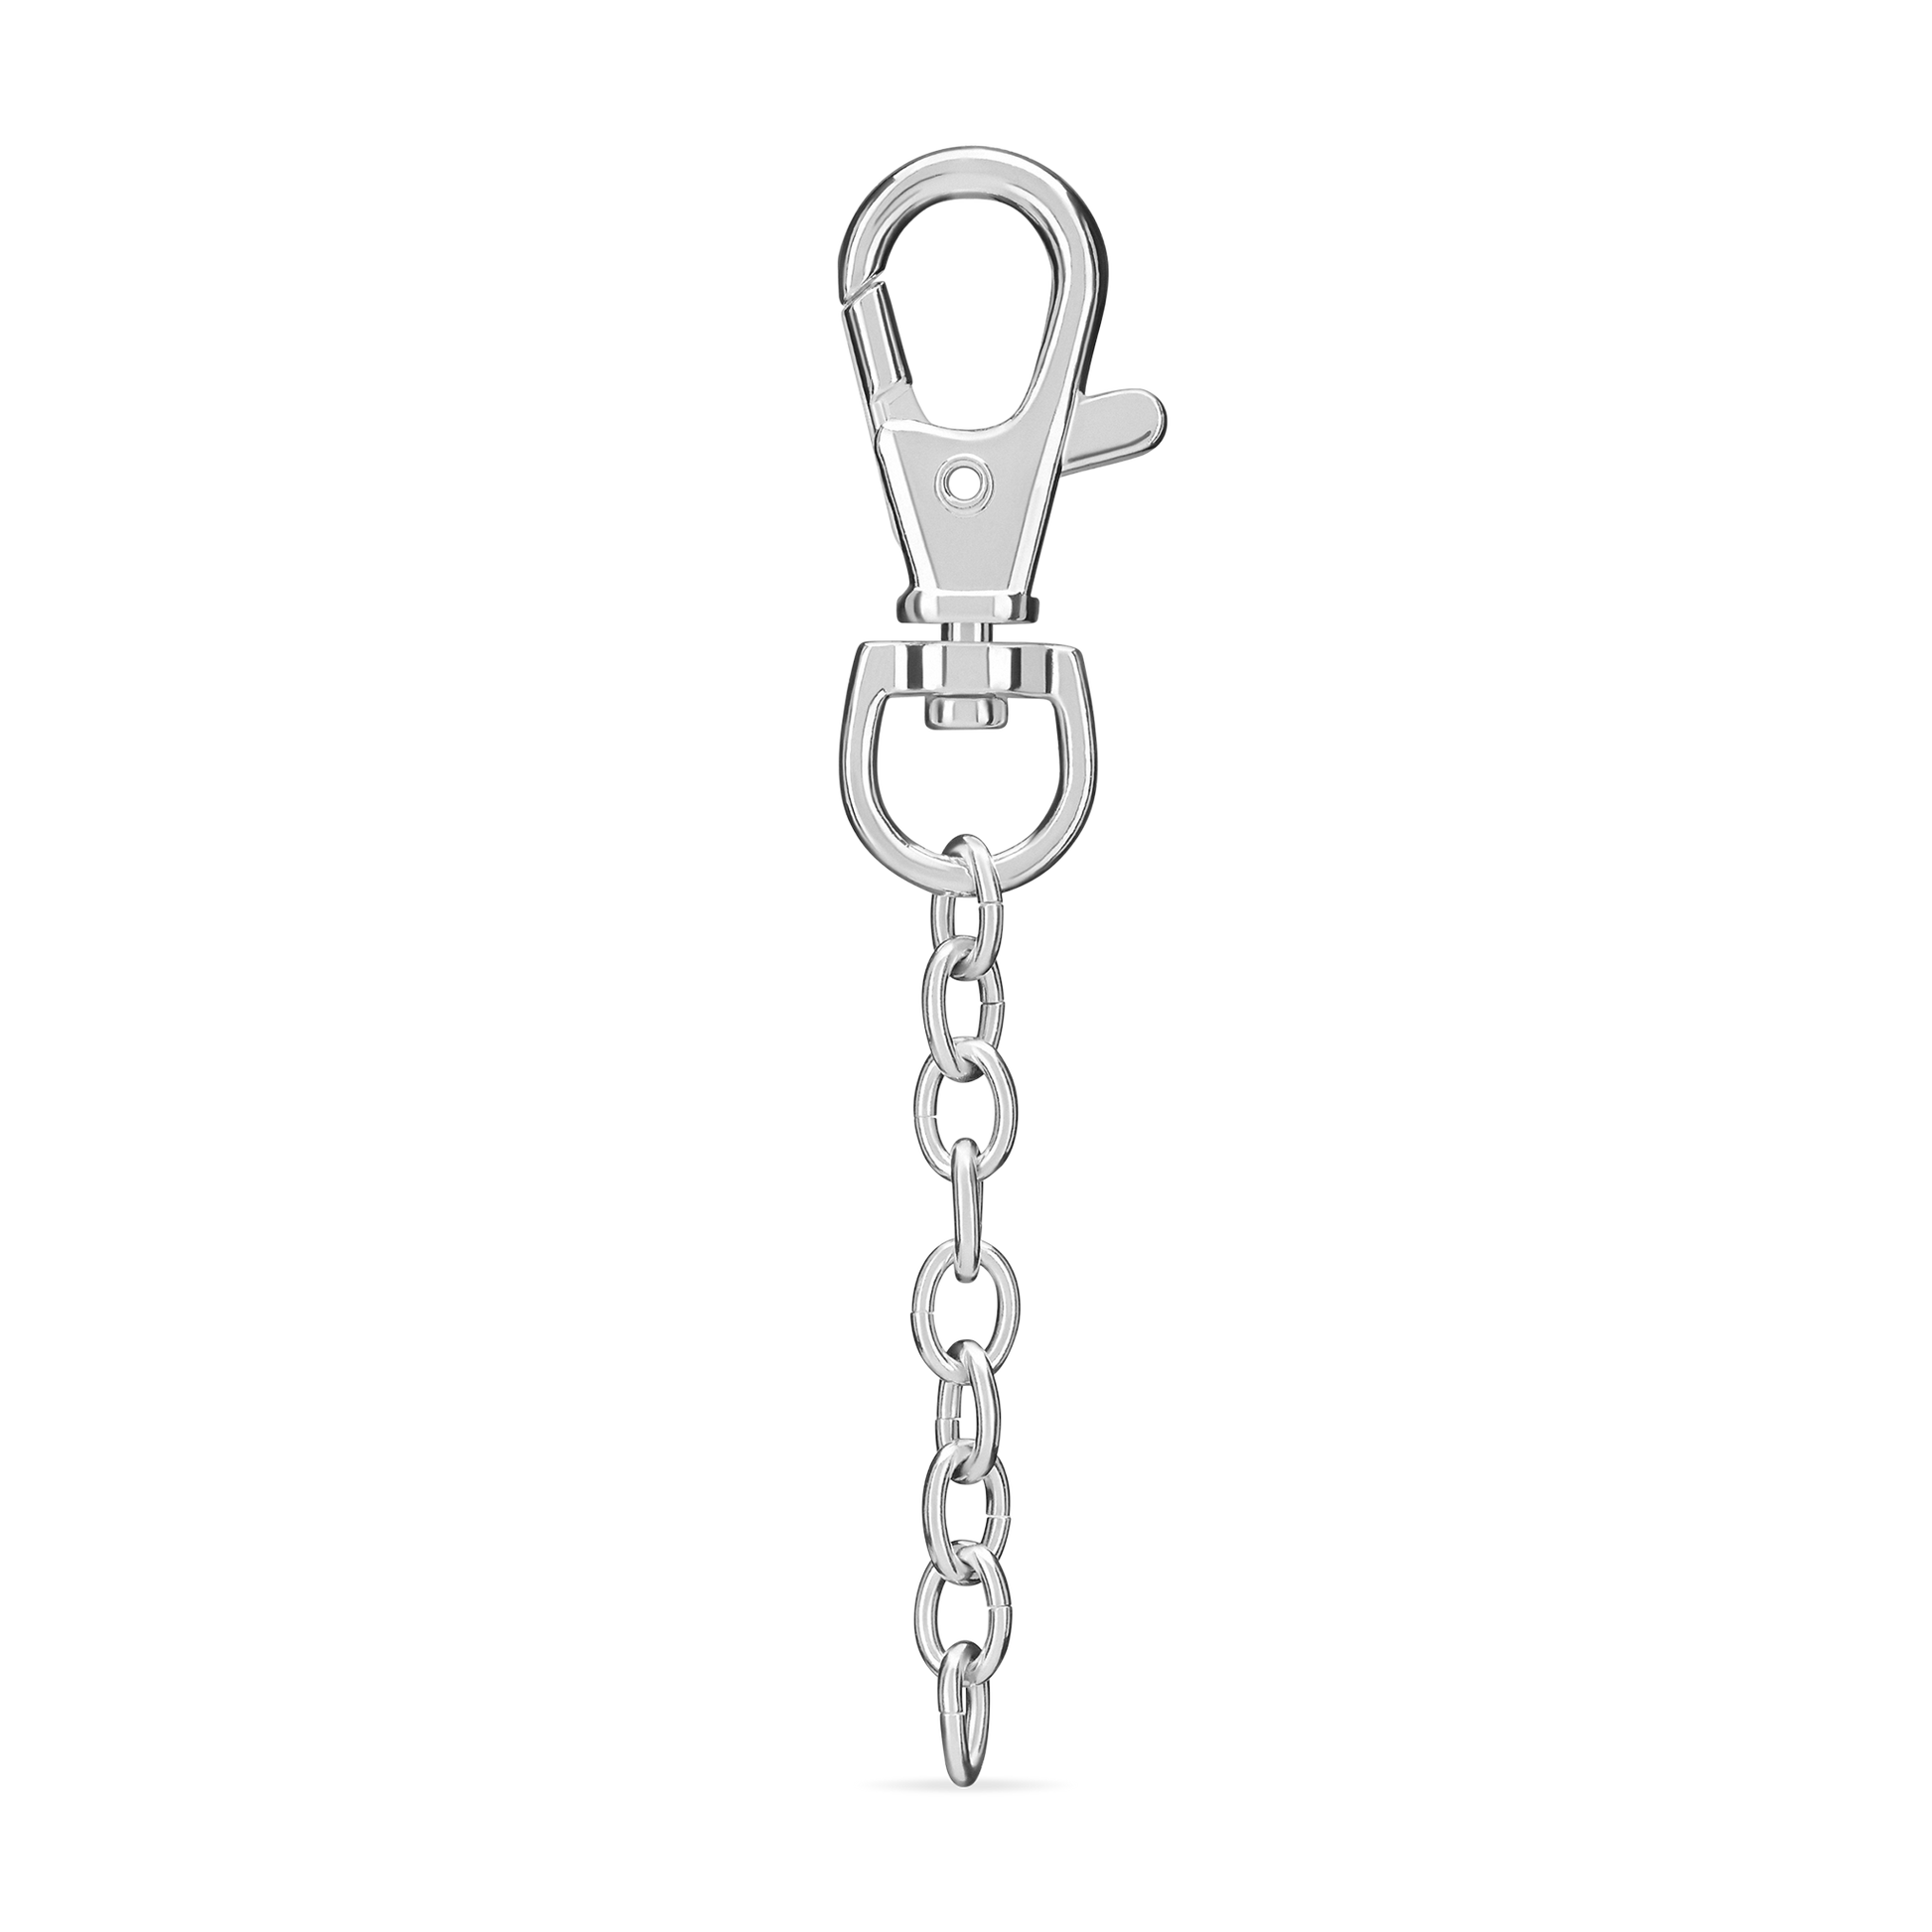 Double Clasp Bag Charm Gold or Silver for Your Bags 